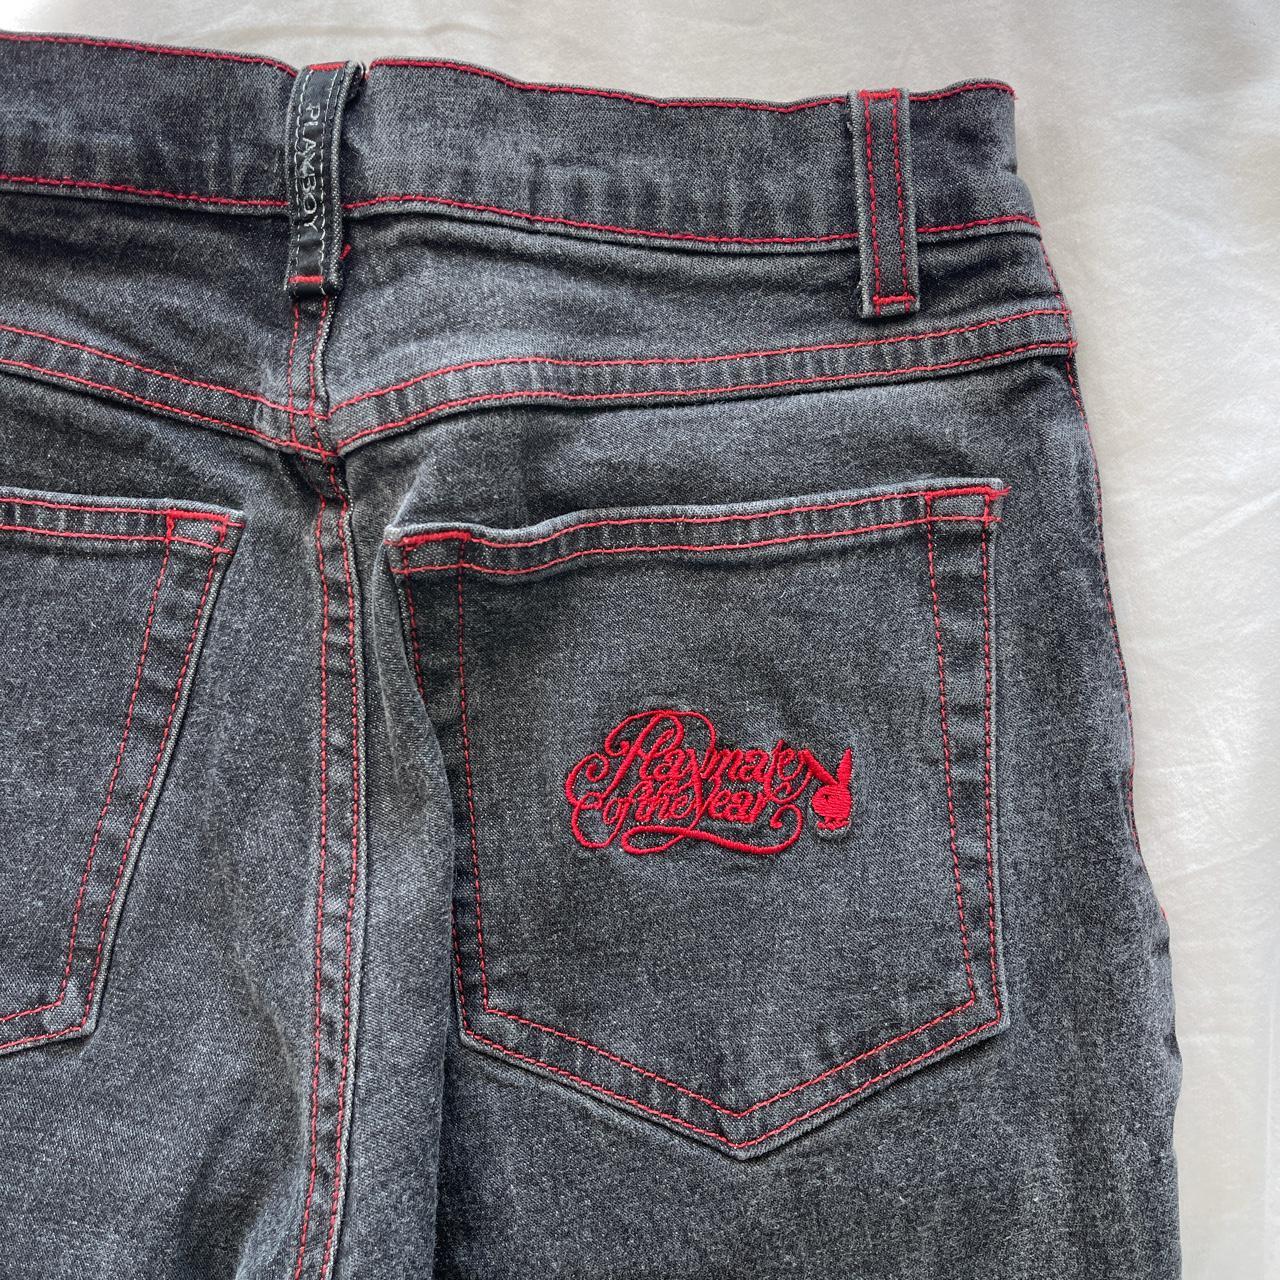 Playboy Jeans Playmate of the Year in red stitching... - Depop